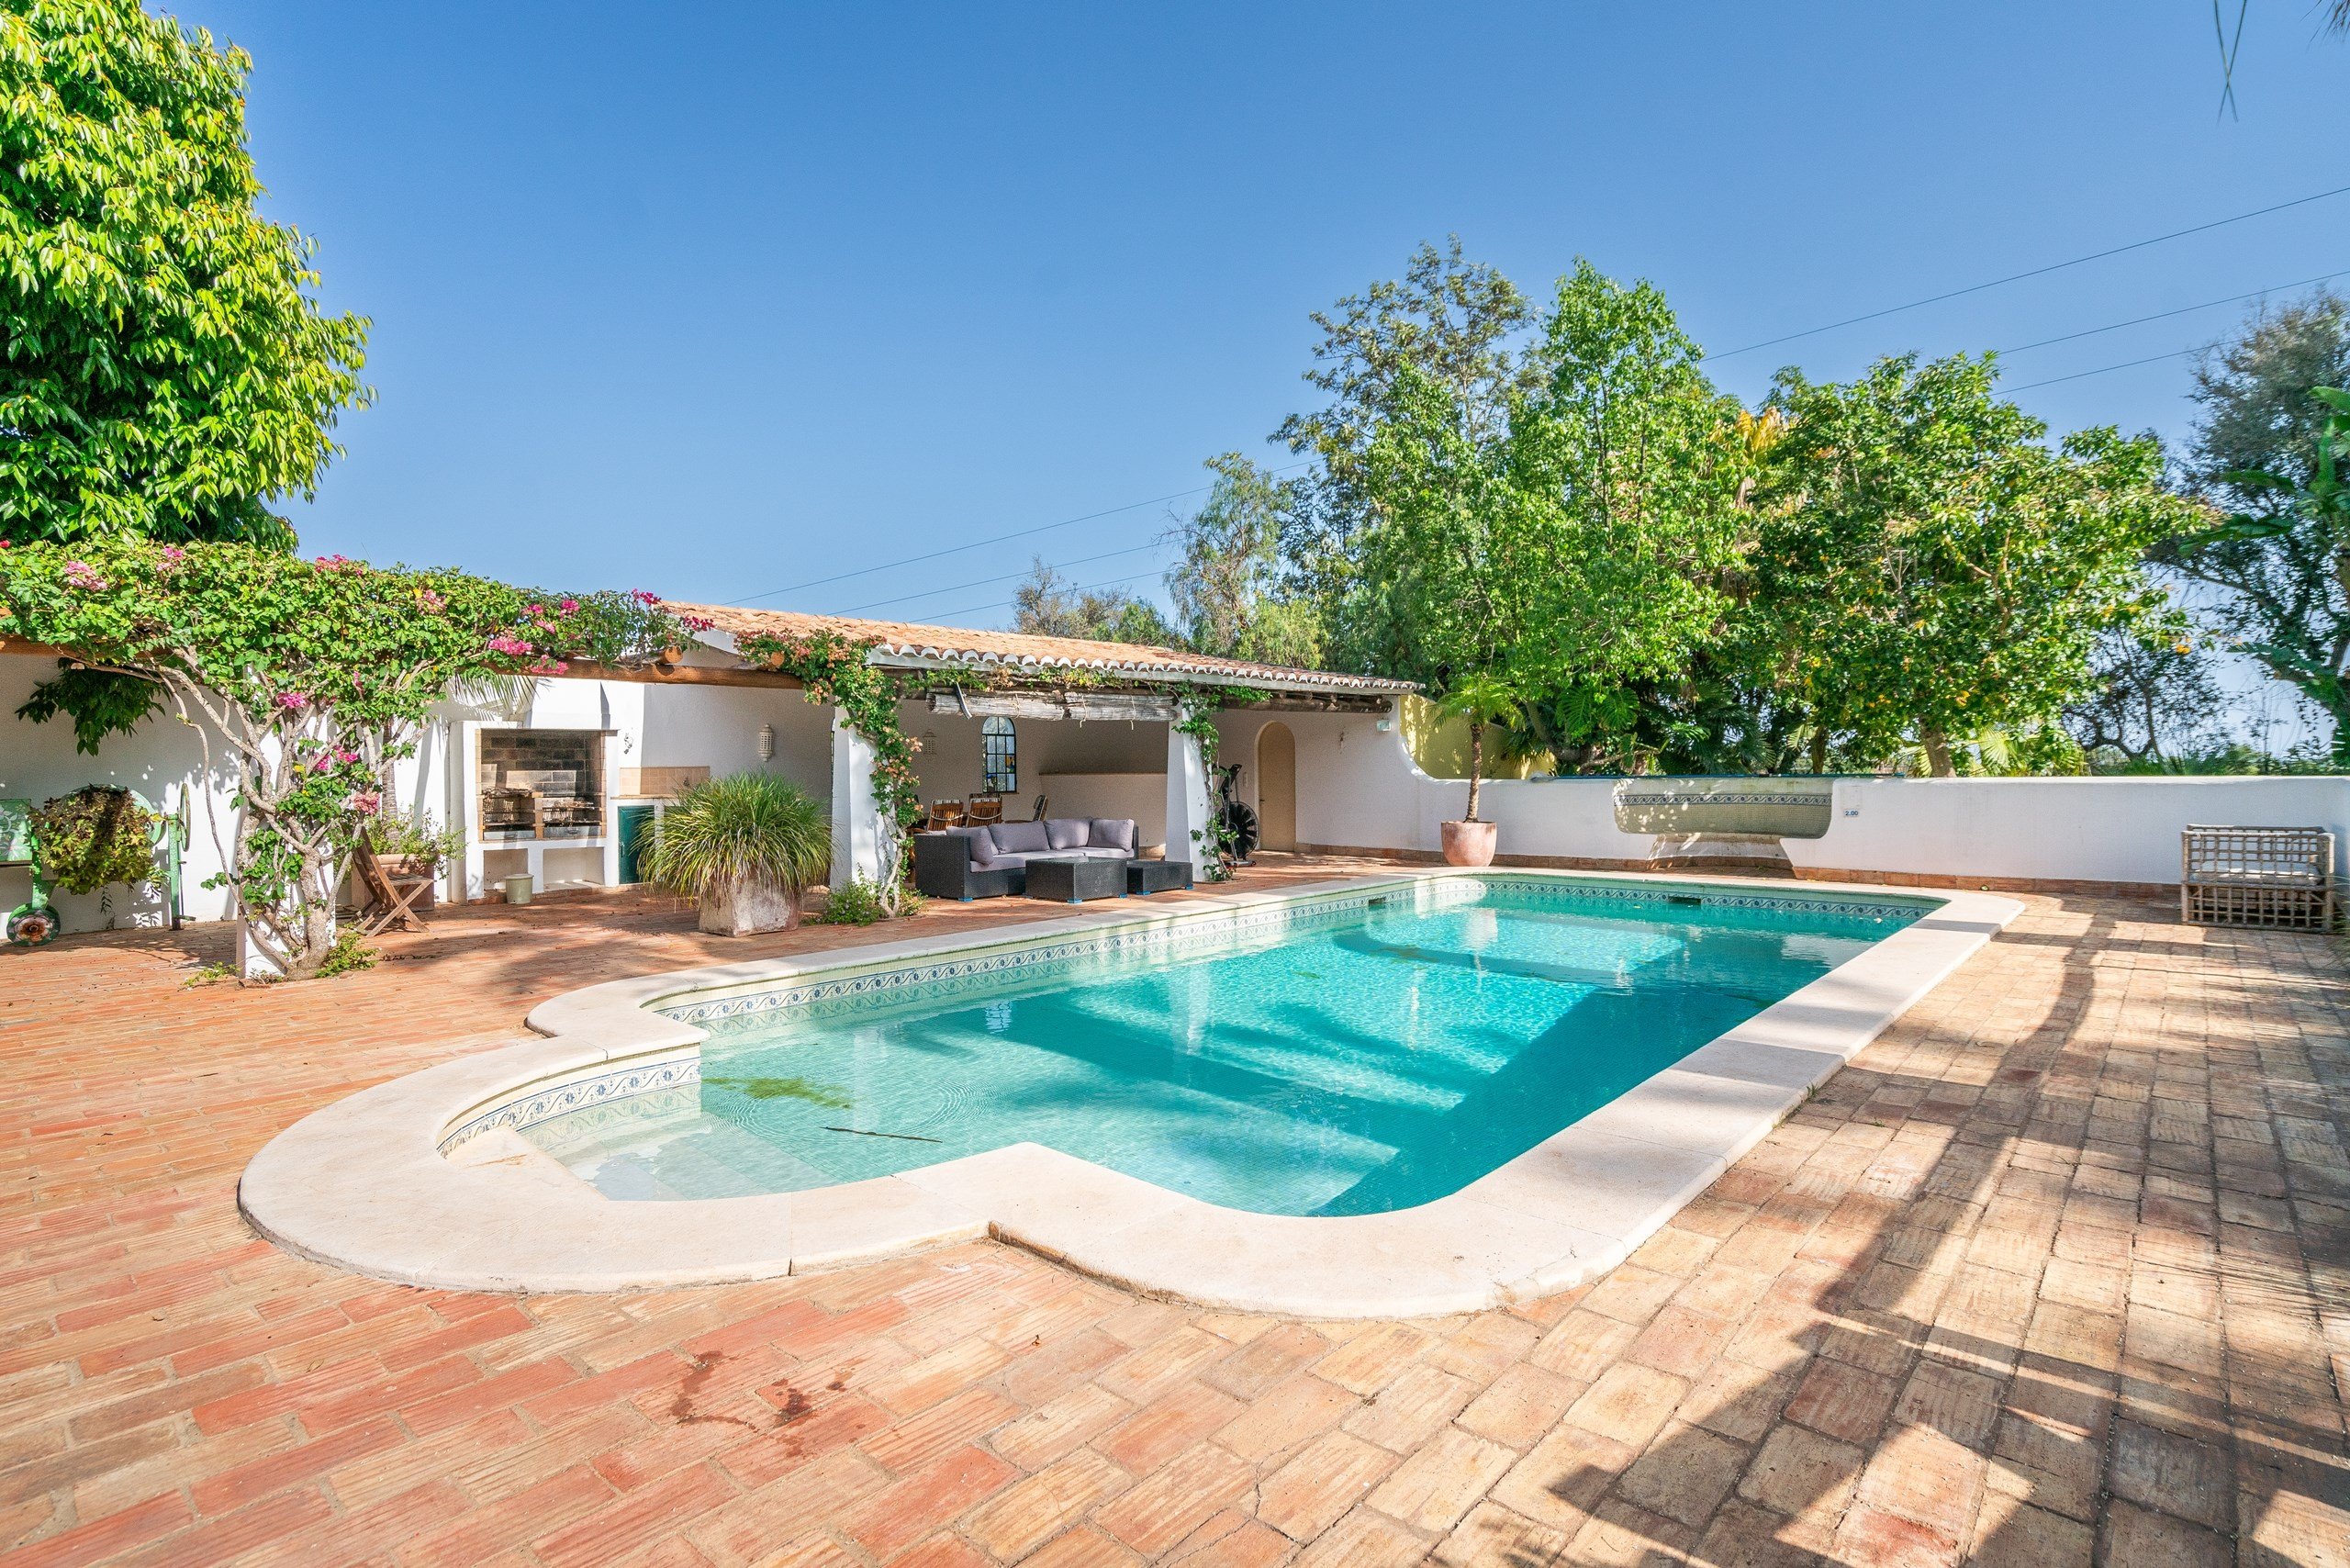 Luxury 7 Bedroom Retreat Villa For Sale in the Algarve, Portugal, with ove3r 35,200 Sqr Mtrs of Land